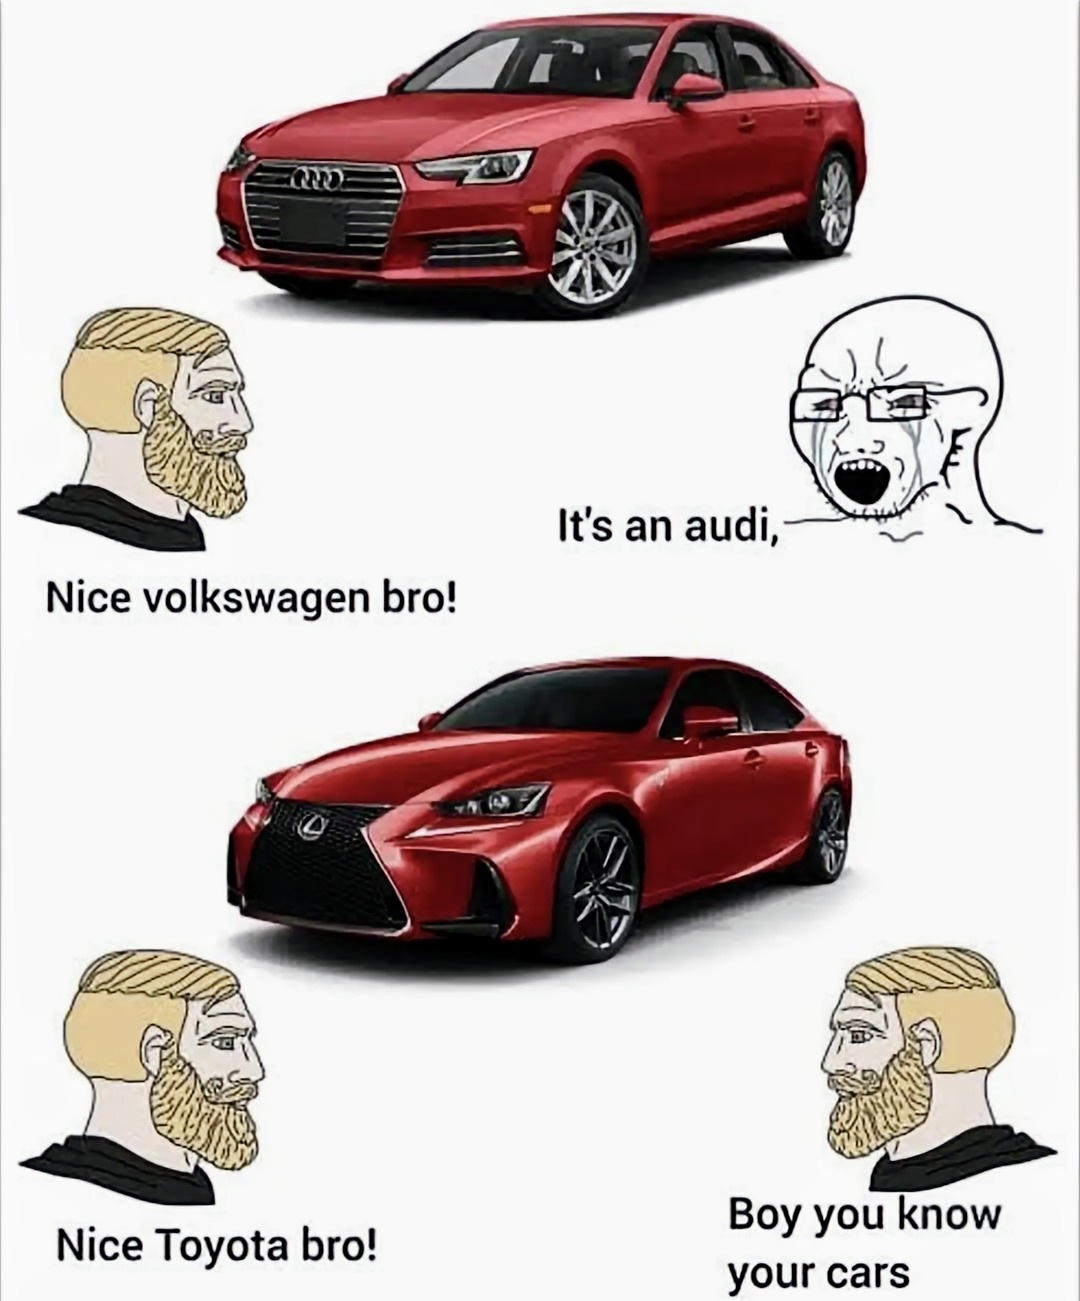 "Car guys" who only respect a single brand are entertaining - meme